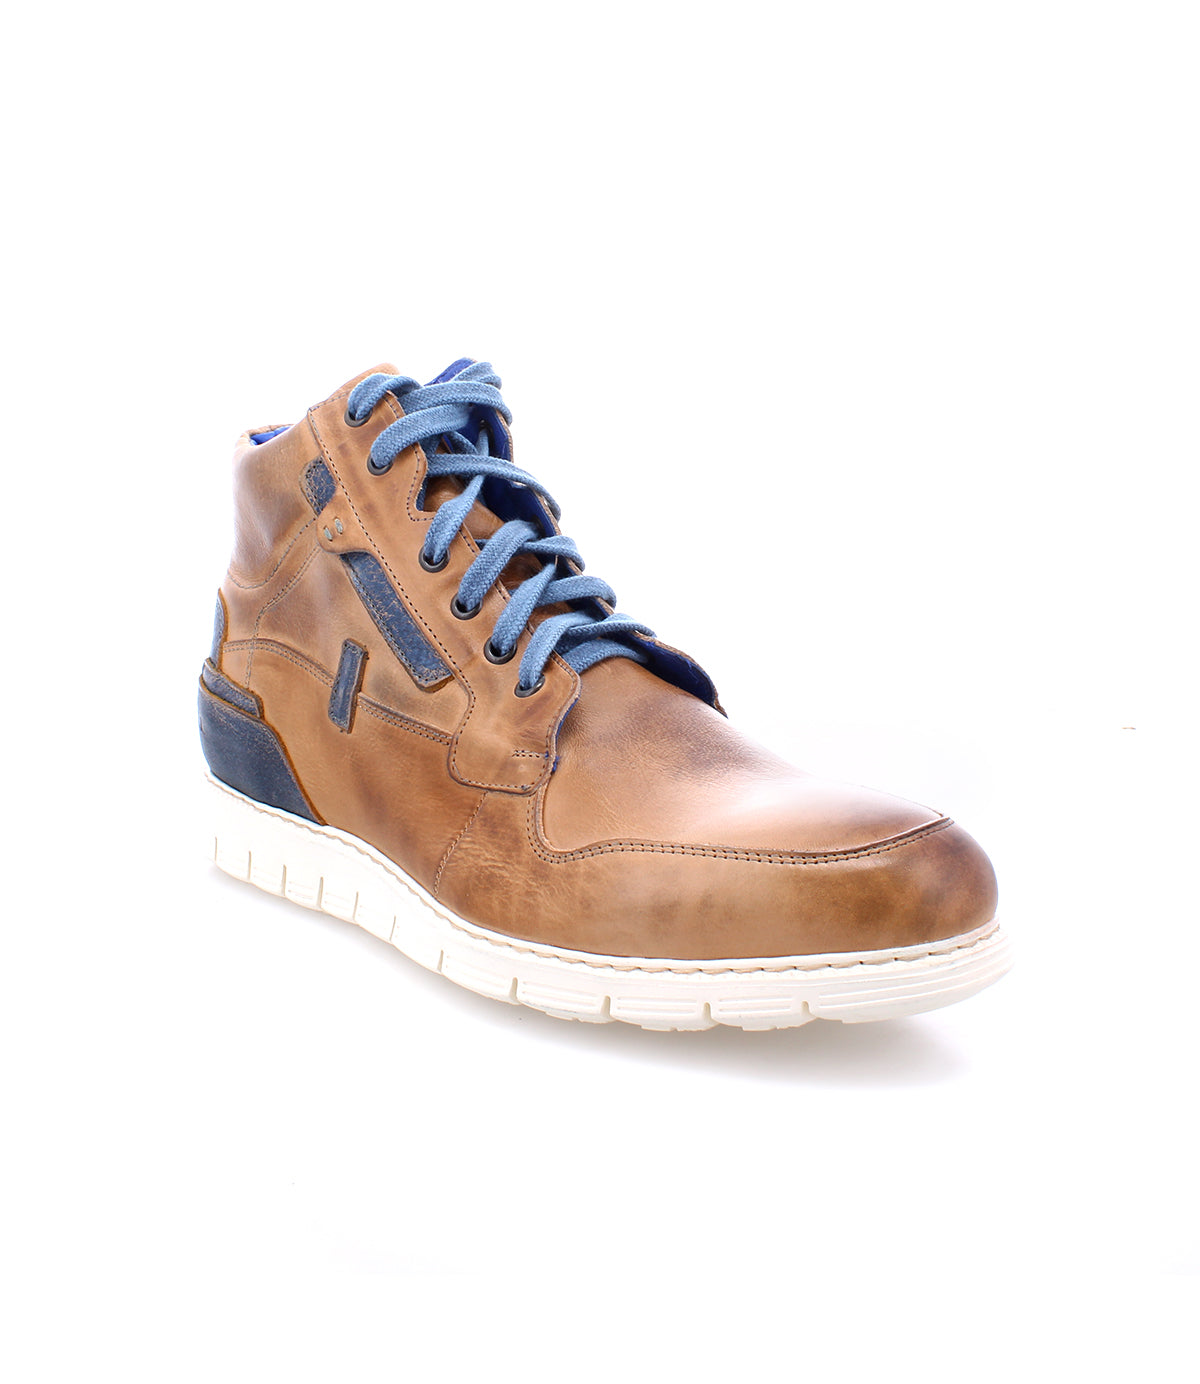 A men's brown leather sneaker with blue laces, lightweight and comfortable, the Bed Stu Galahad.